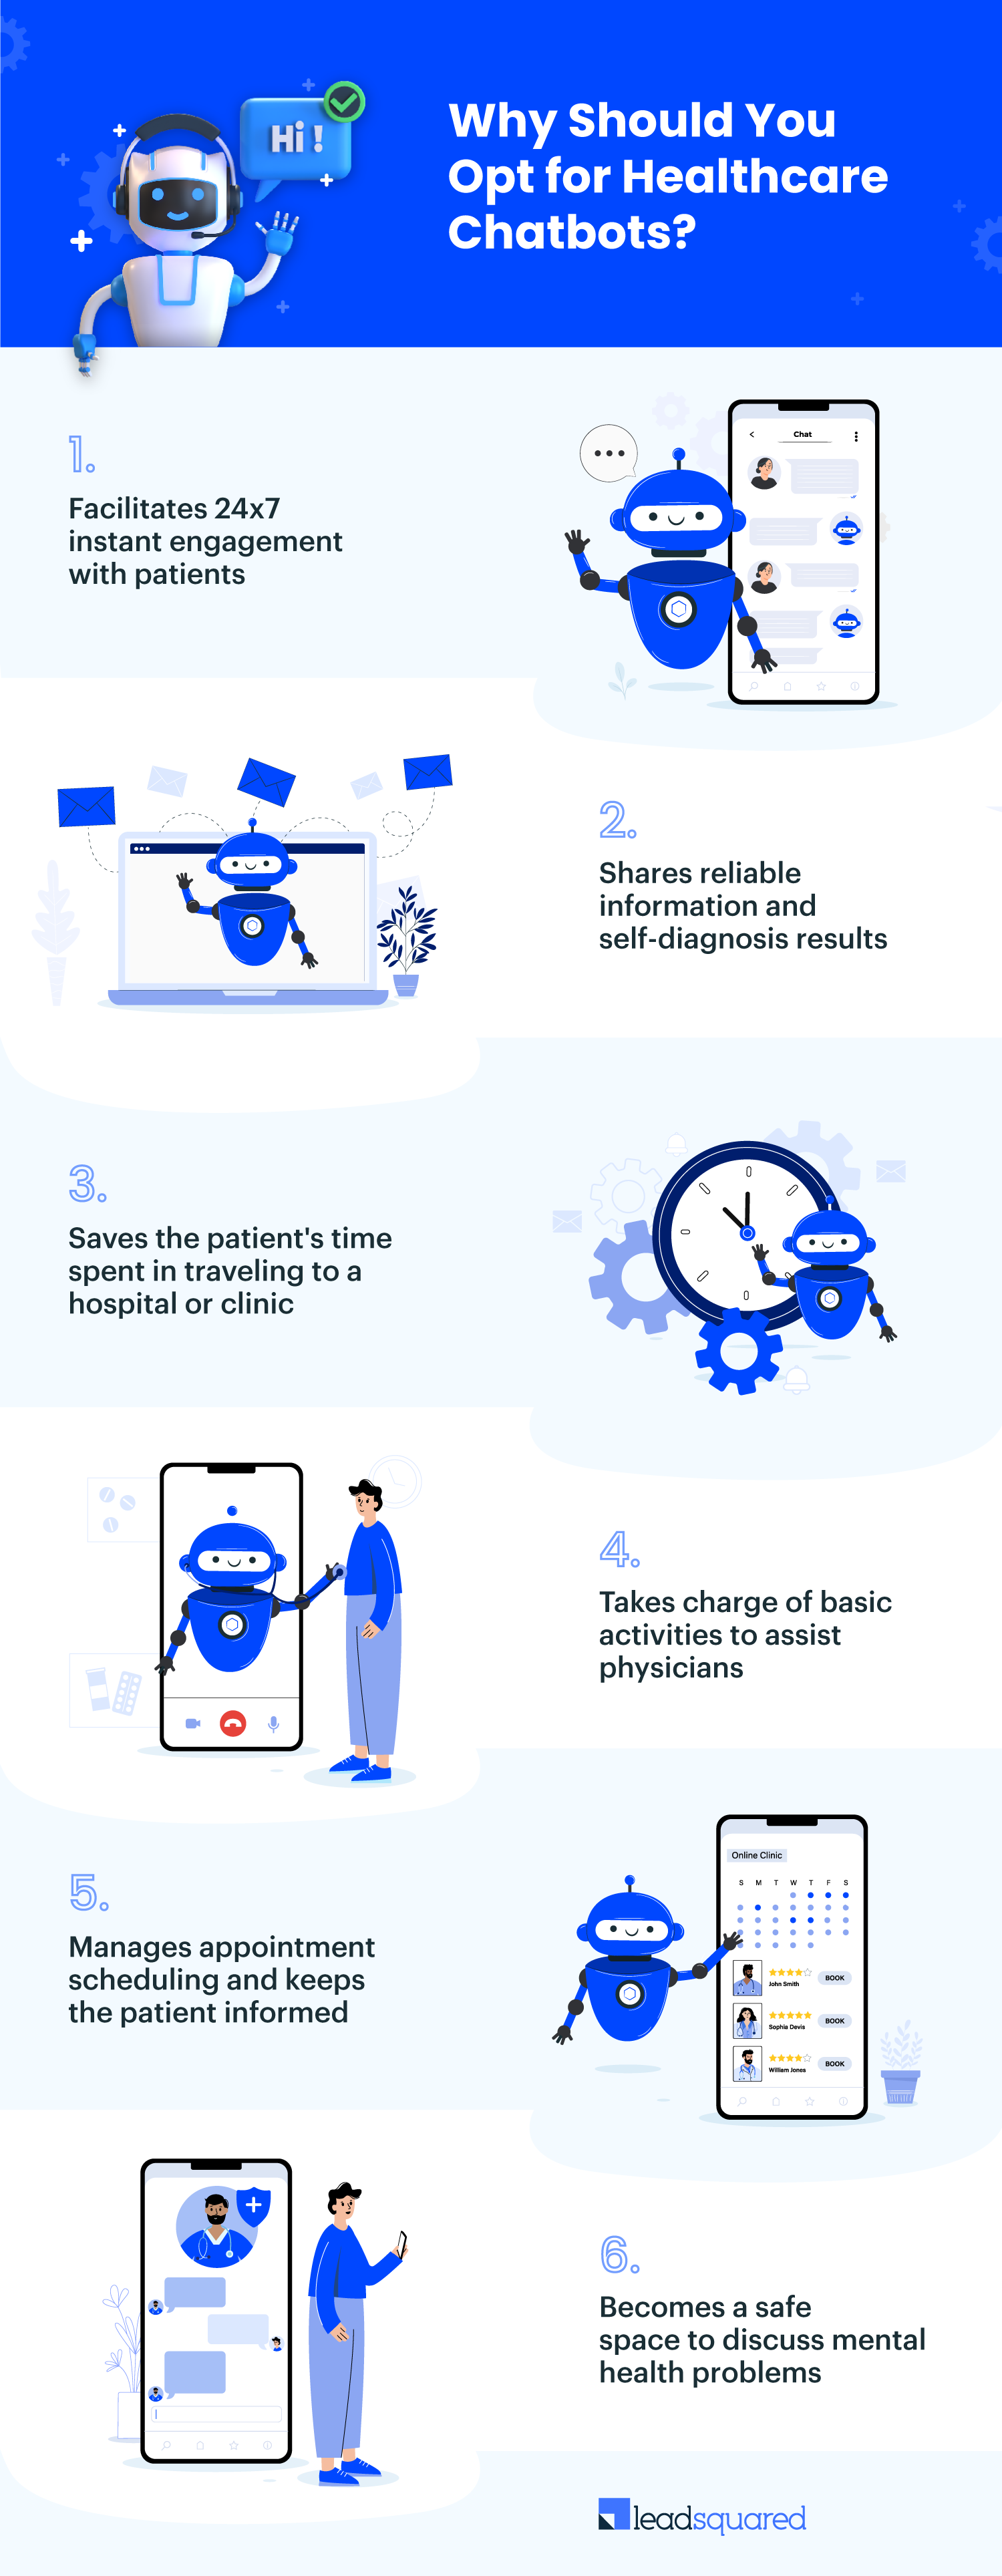 Reasons to opt for a healthcare chatbot